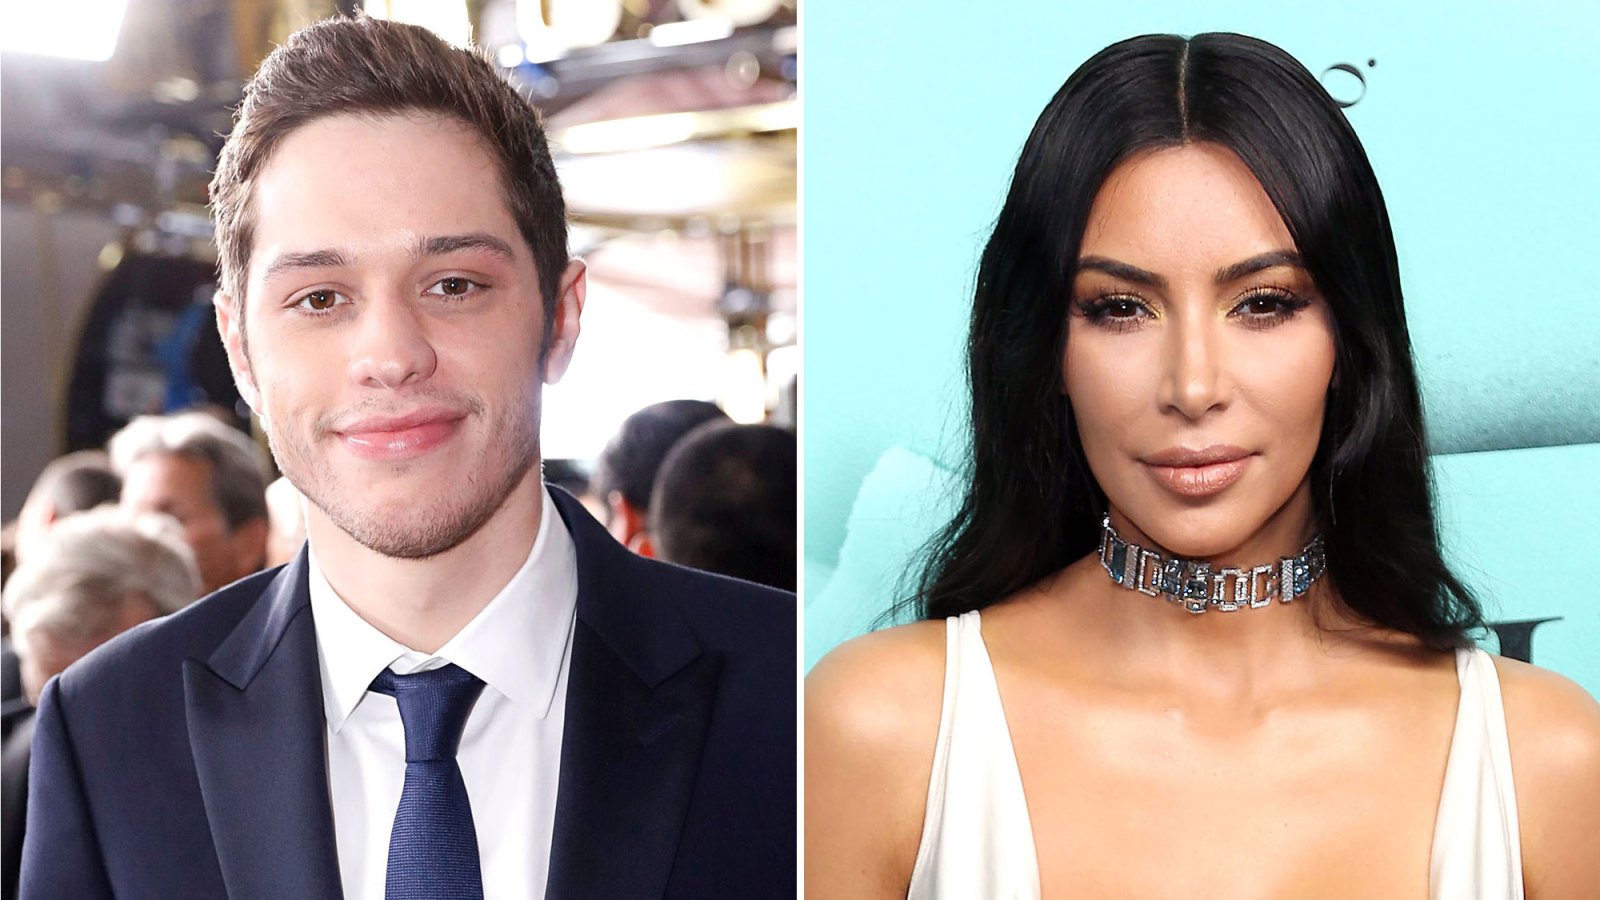 OMG Pete Davidson Appears to Have a Tribute Tattoo for Kim Kardashian